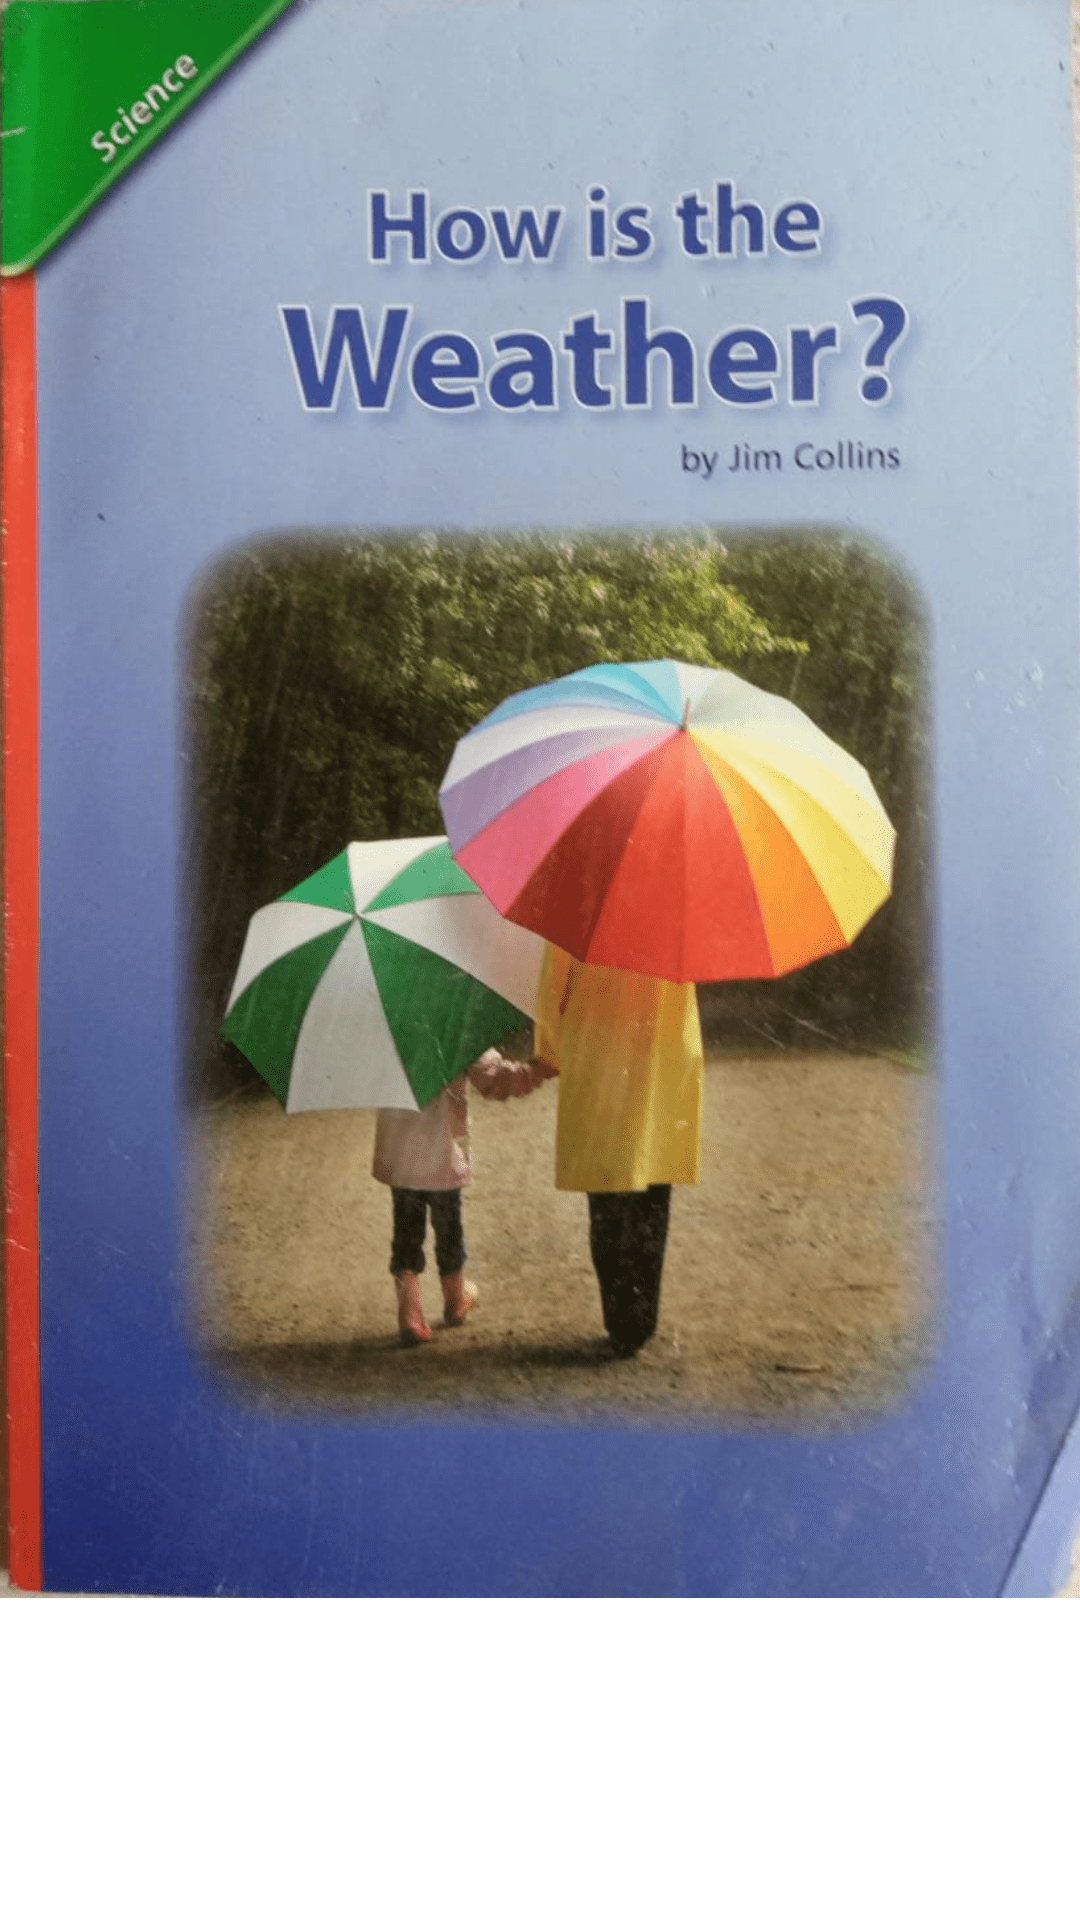 How is the Weather? by Jim Collins